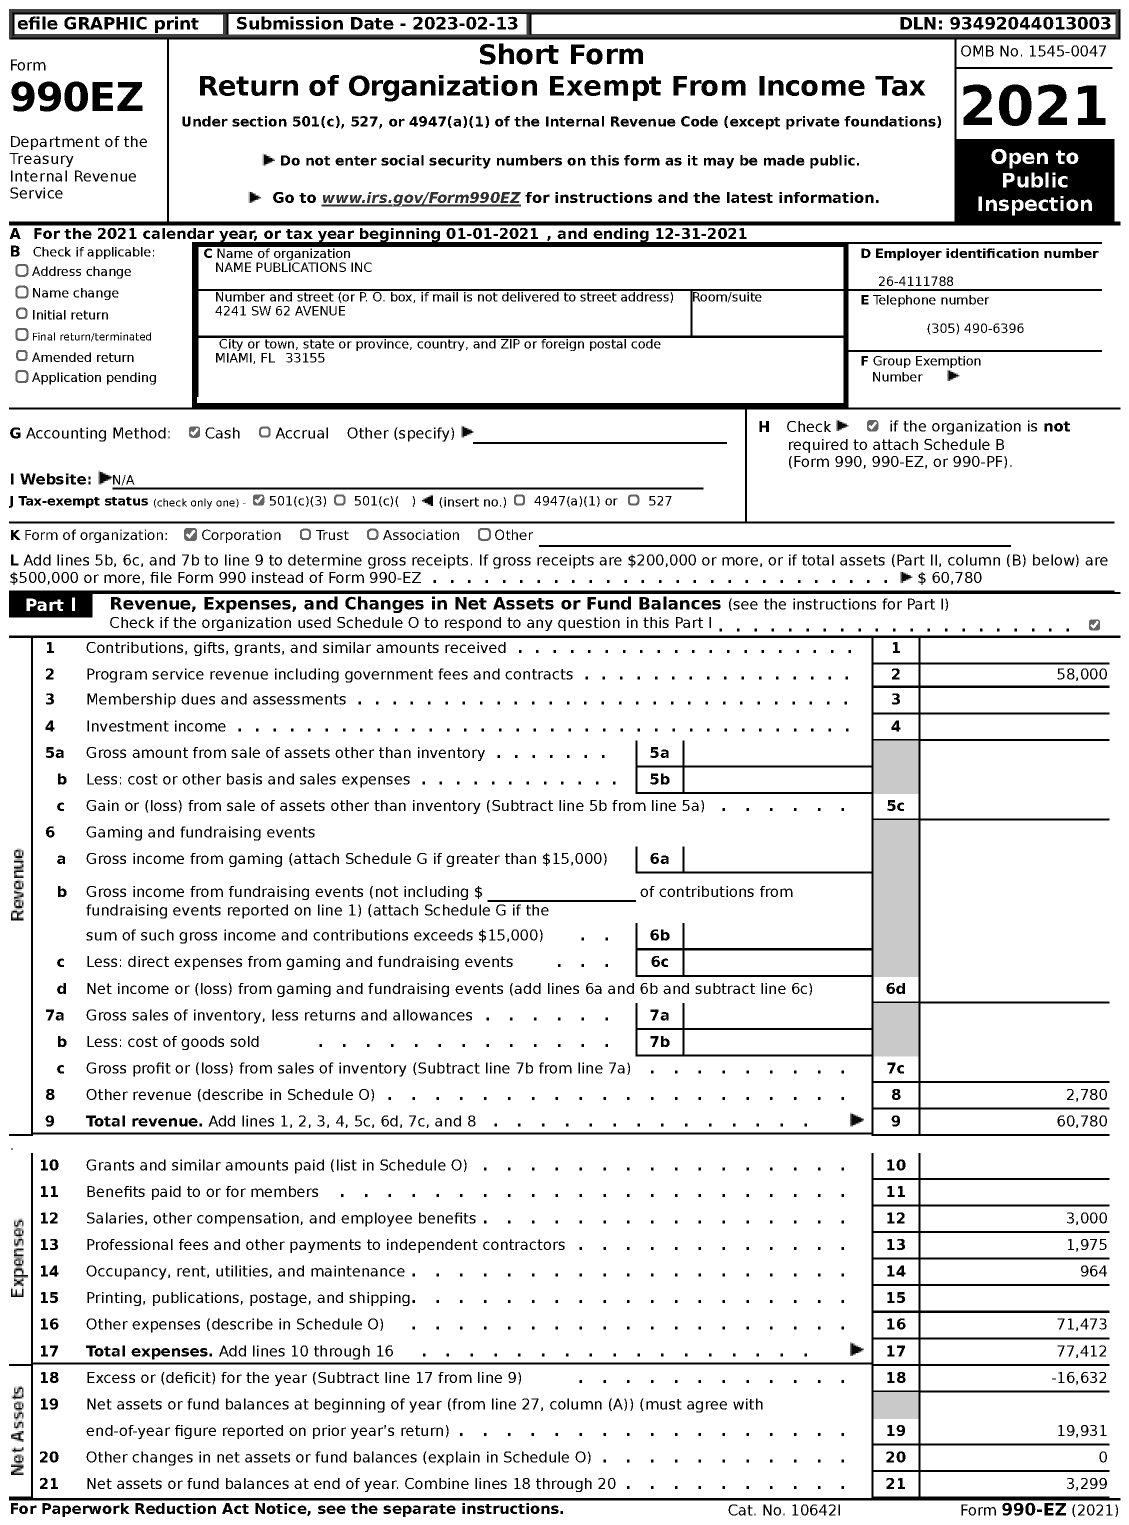 Image of first page of 2021 Form 990EZ for Name Publications